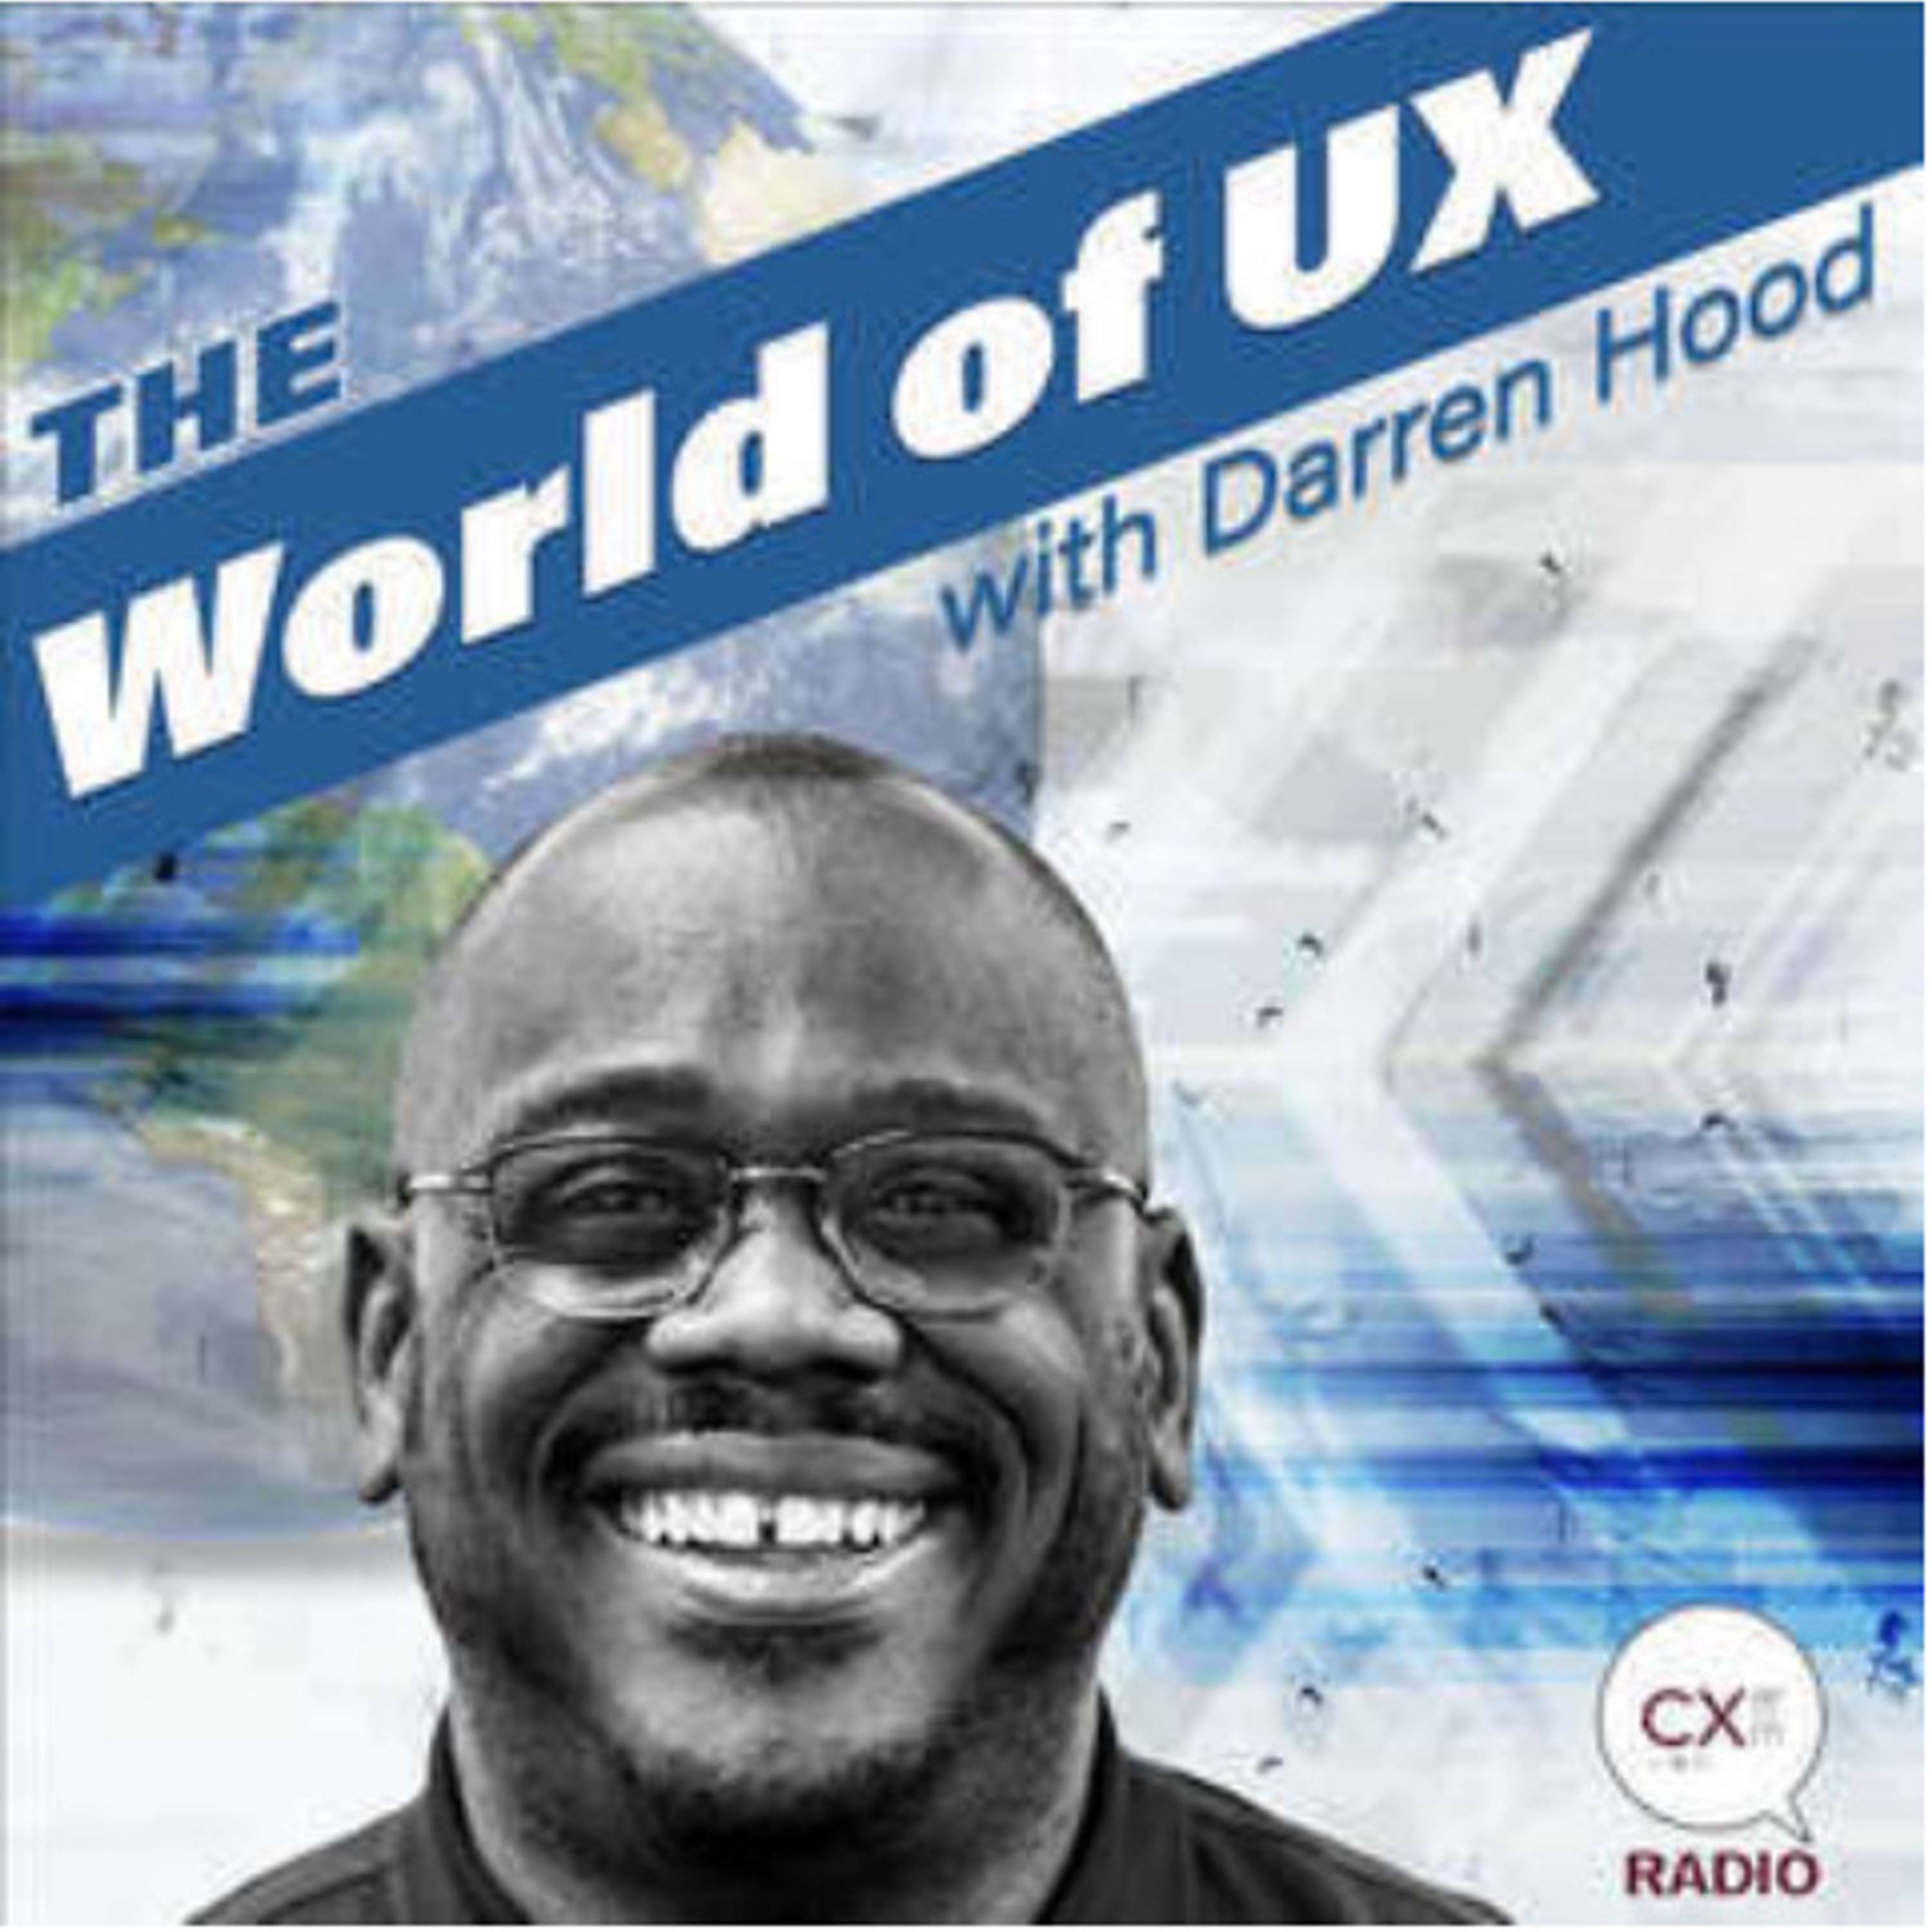 Episode 191: Traits of Today's Sinister UX Culture, Part 15 (The UX Education Session)